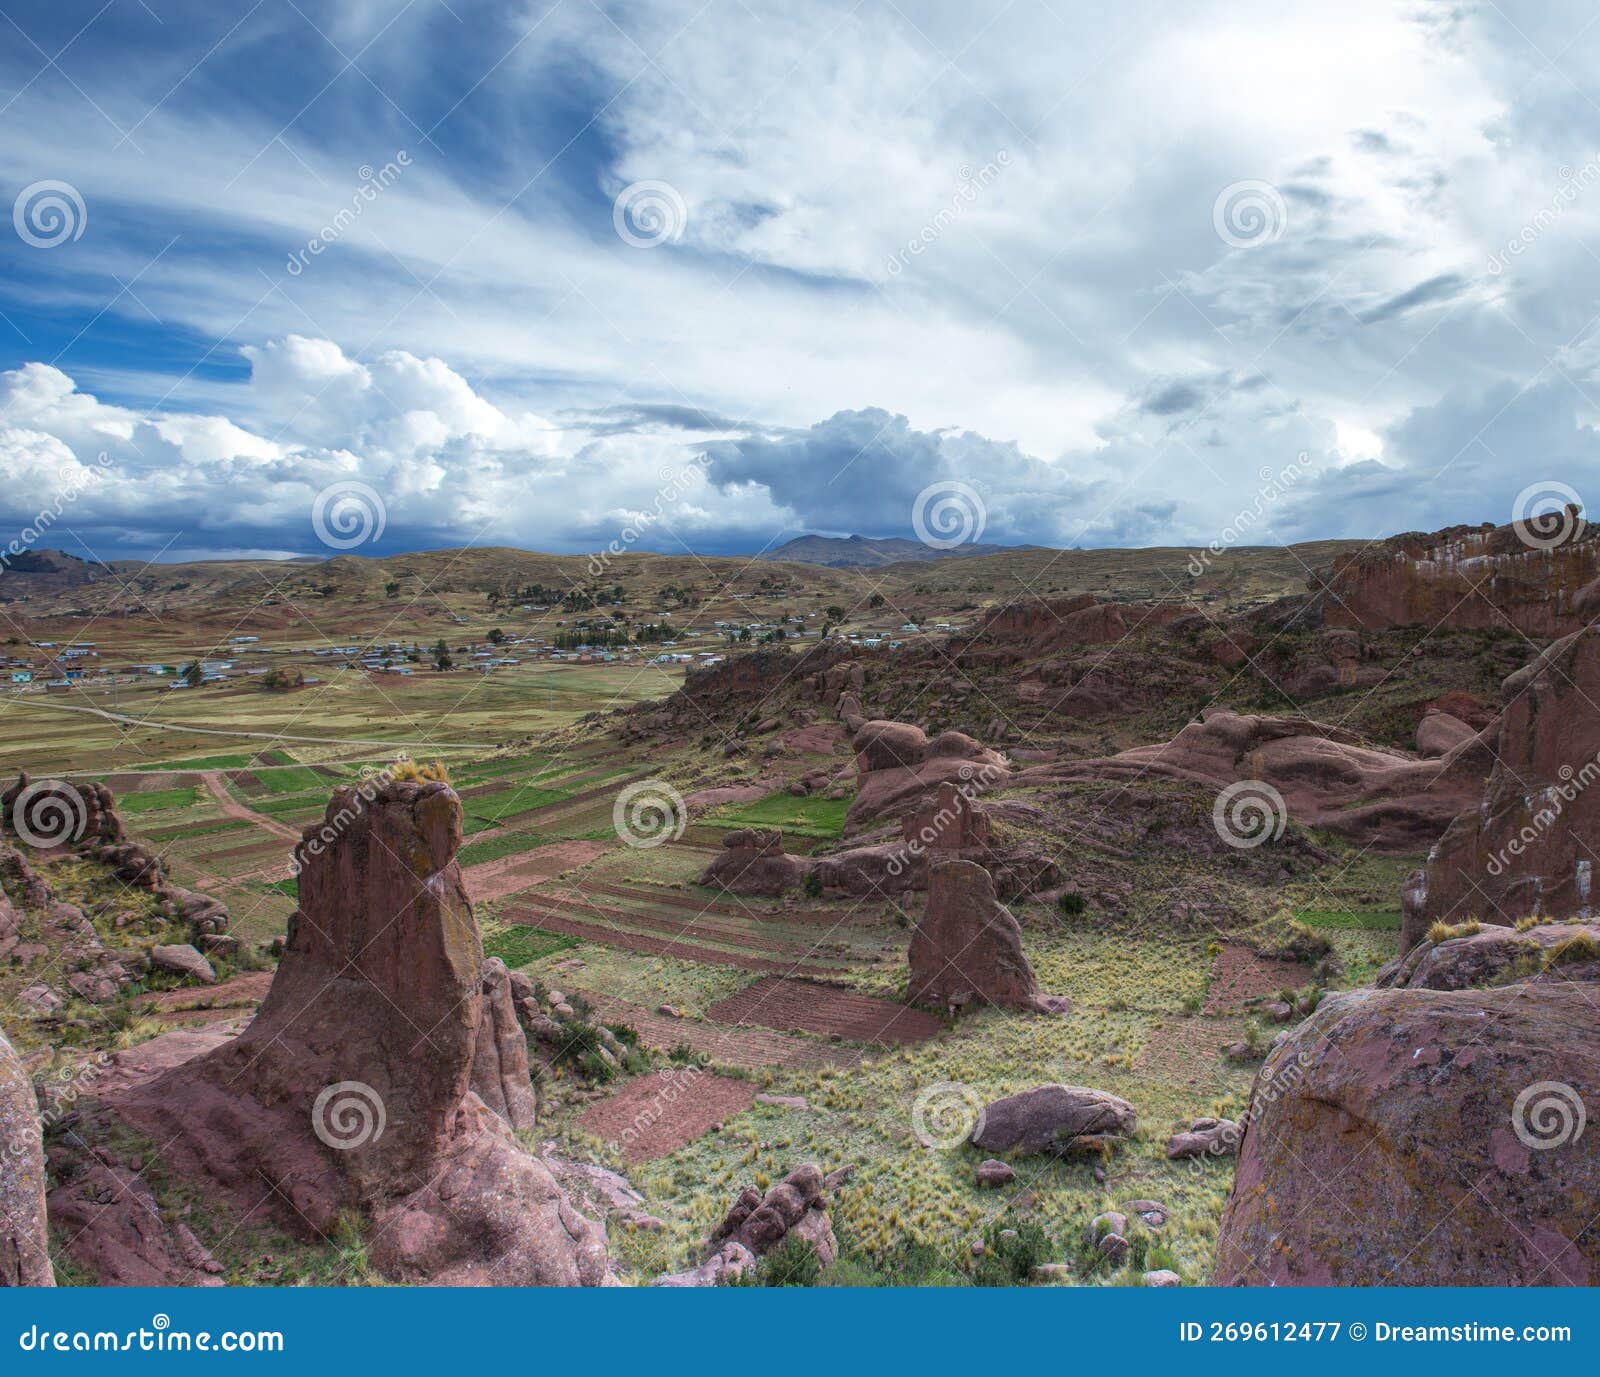 hayu marca, the mysterious stargate and unique rock formations near puno